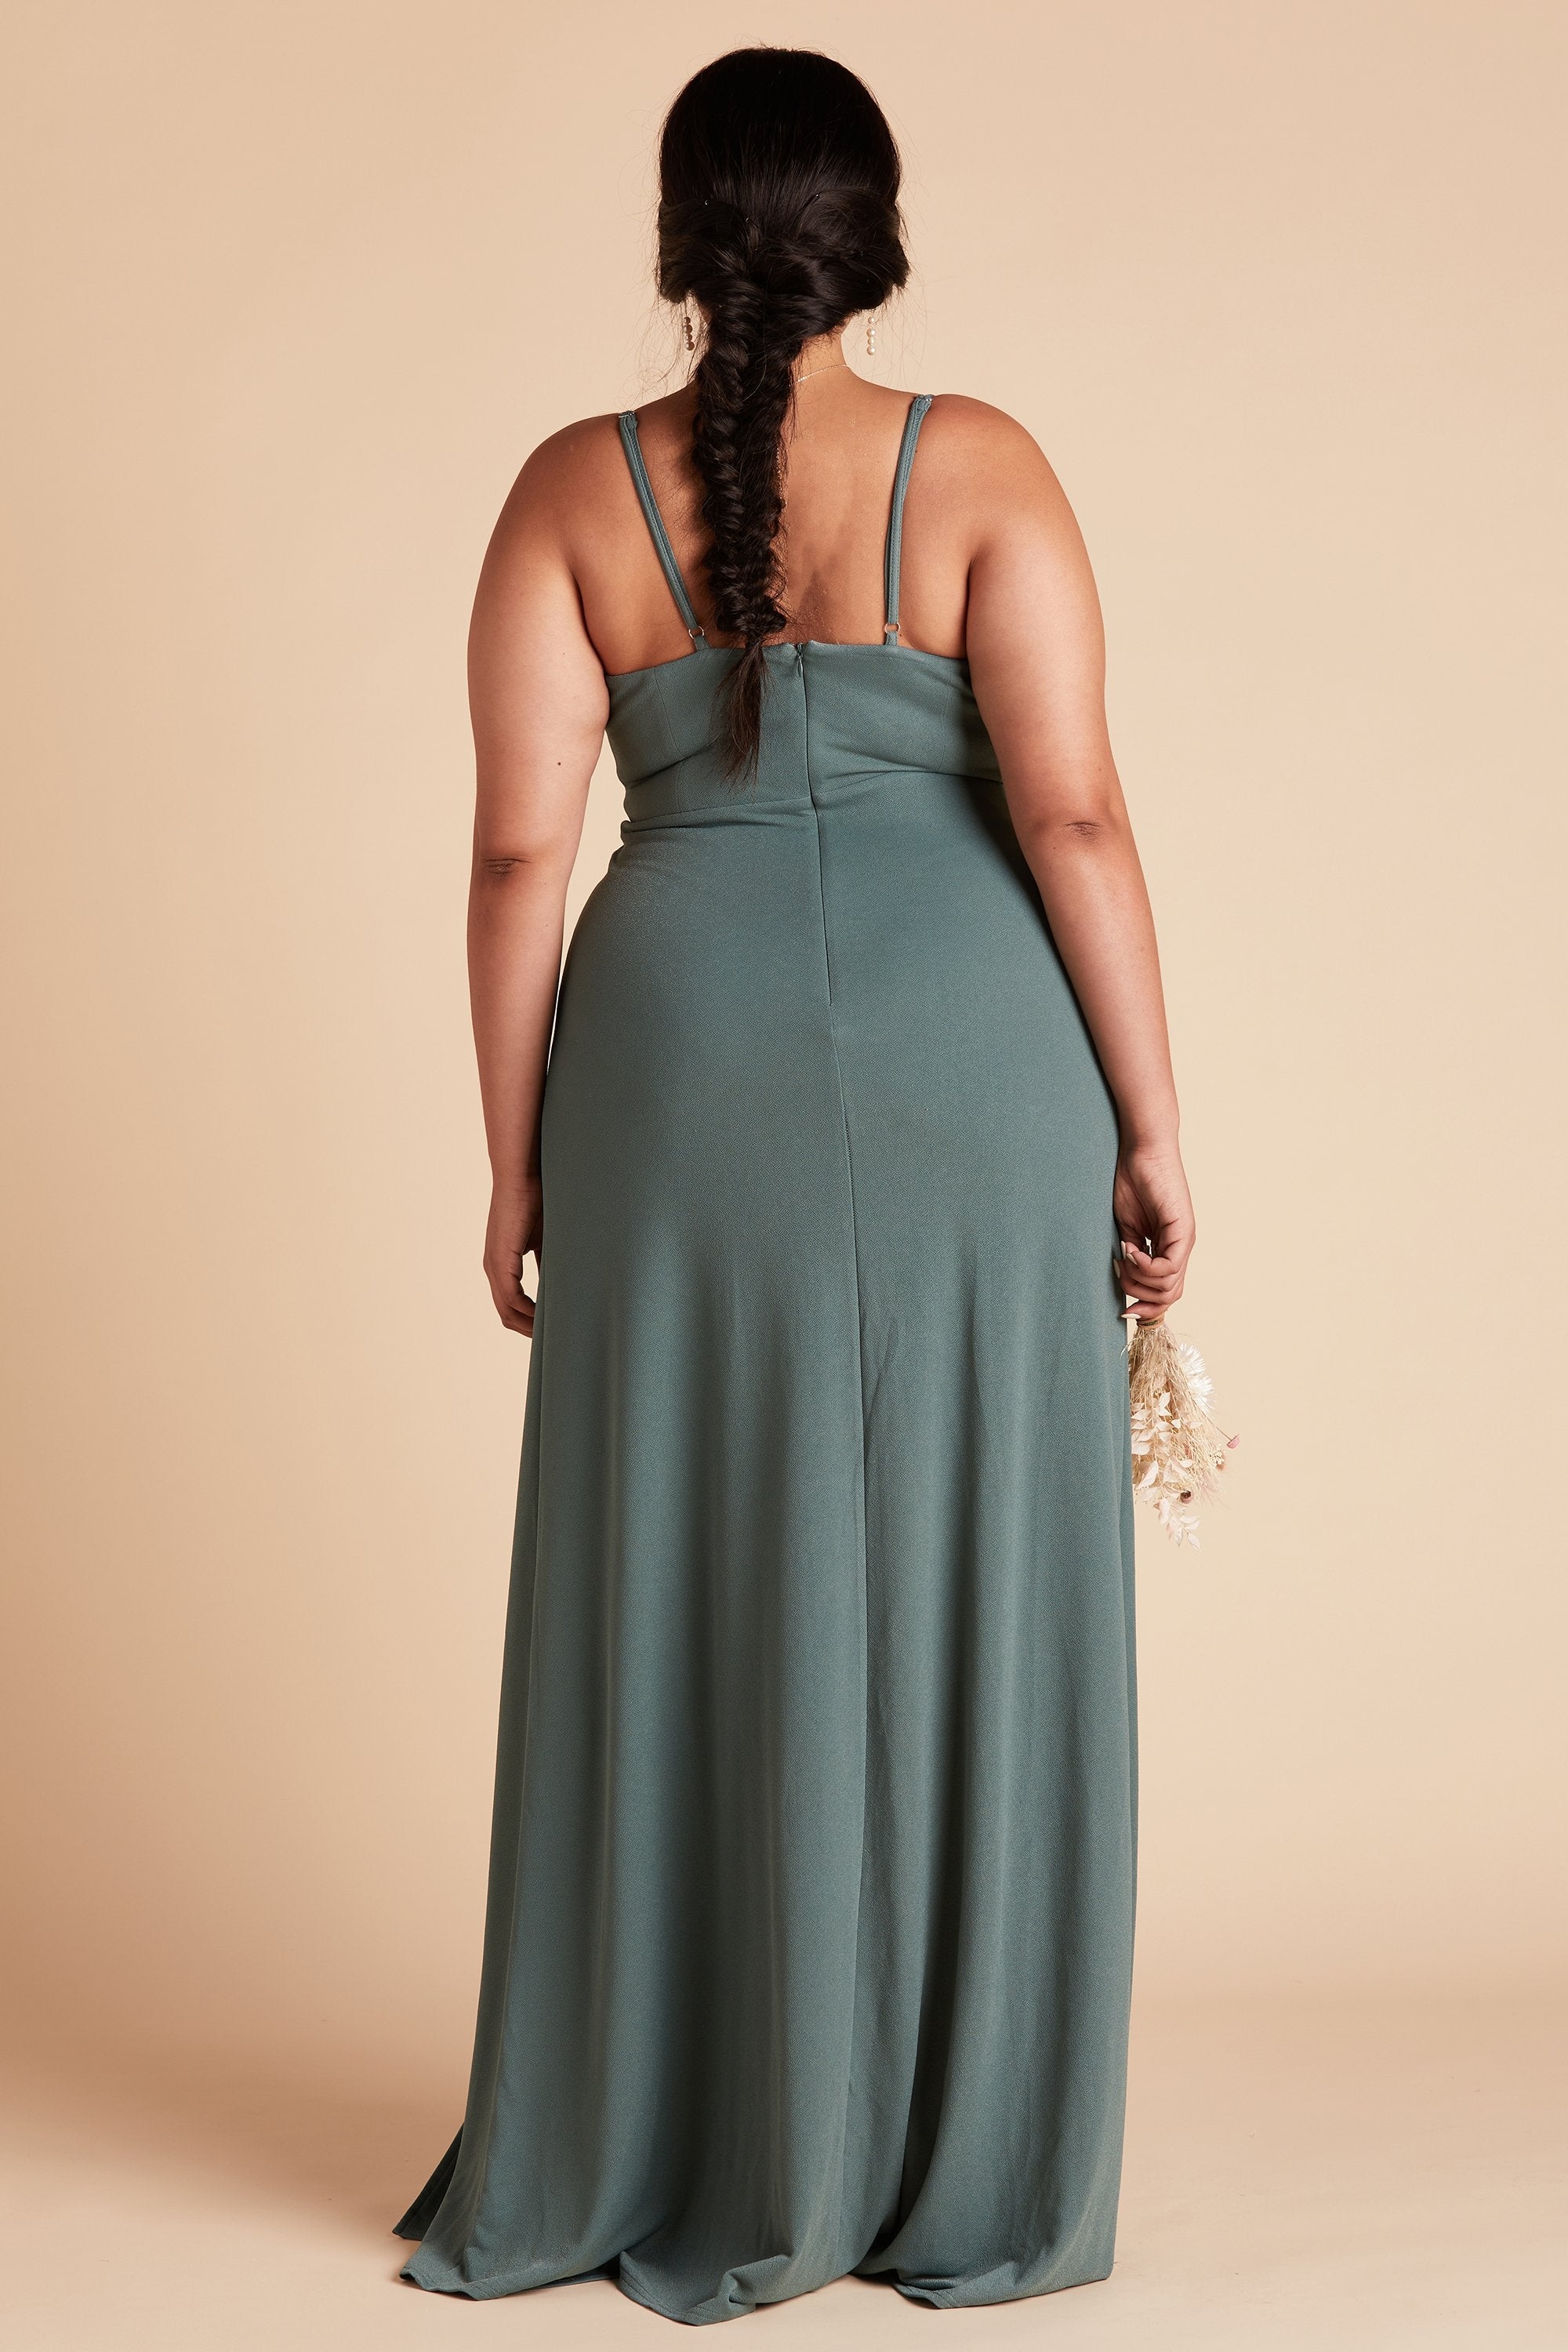 Back view of the Ash Plus Size Bridesmaid Dress in sea glass crepe shows skinny adjustable straps as well as an open back just below shoulder blades.